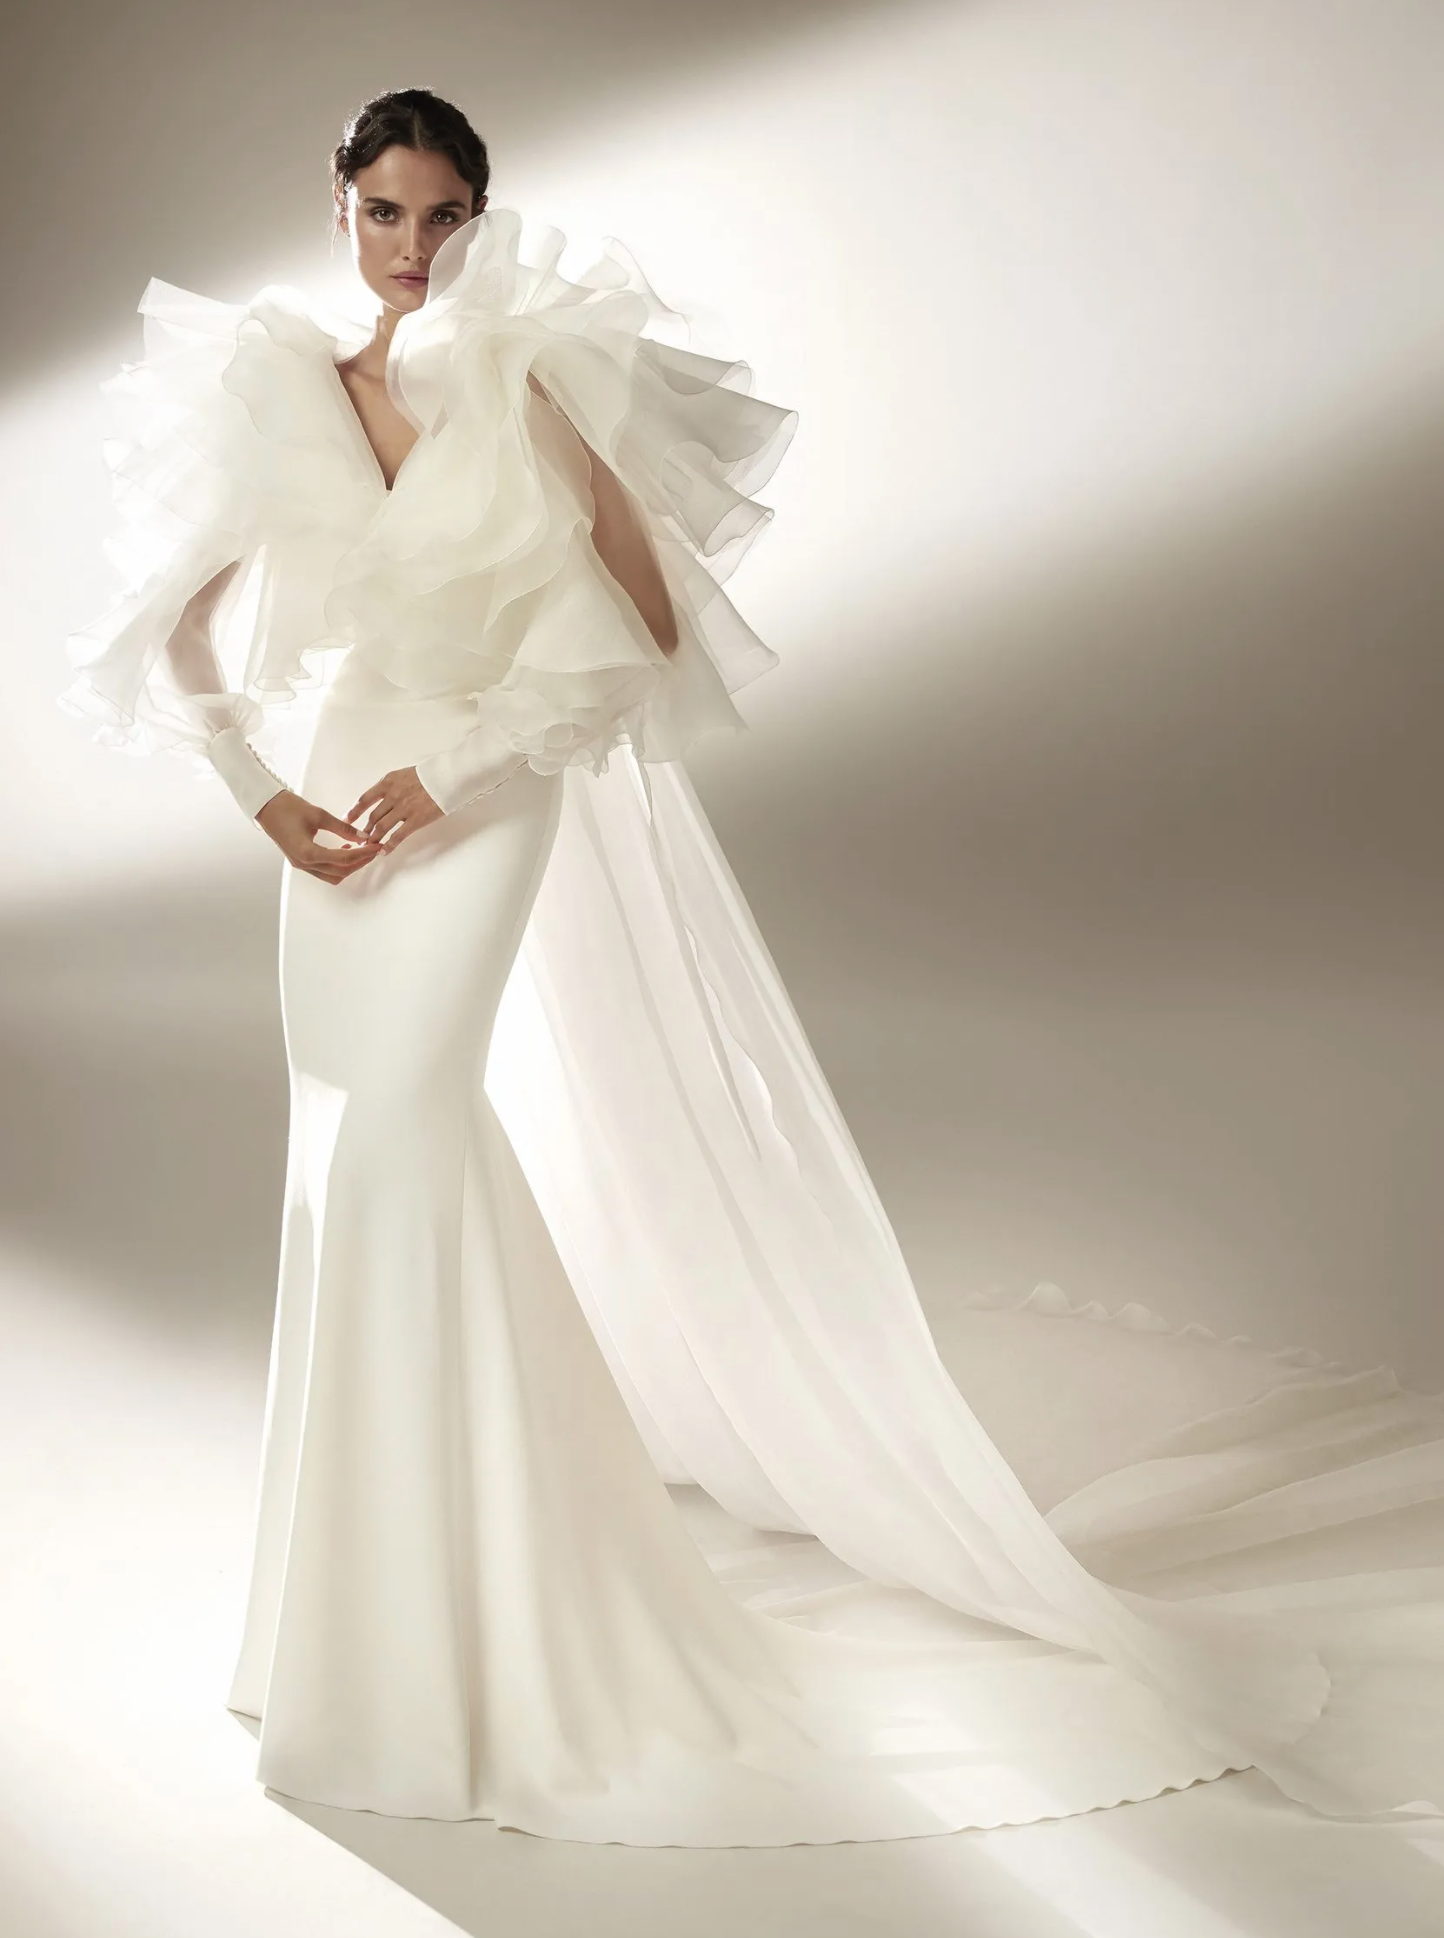 A bride wears a ruffle sleeve dress that is fitted and flares at the bottom. Pronovias.